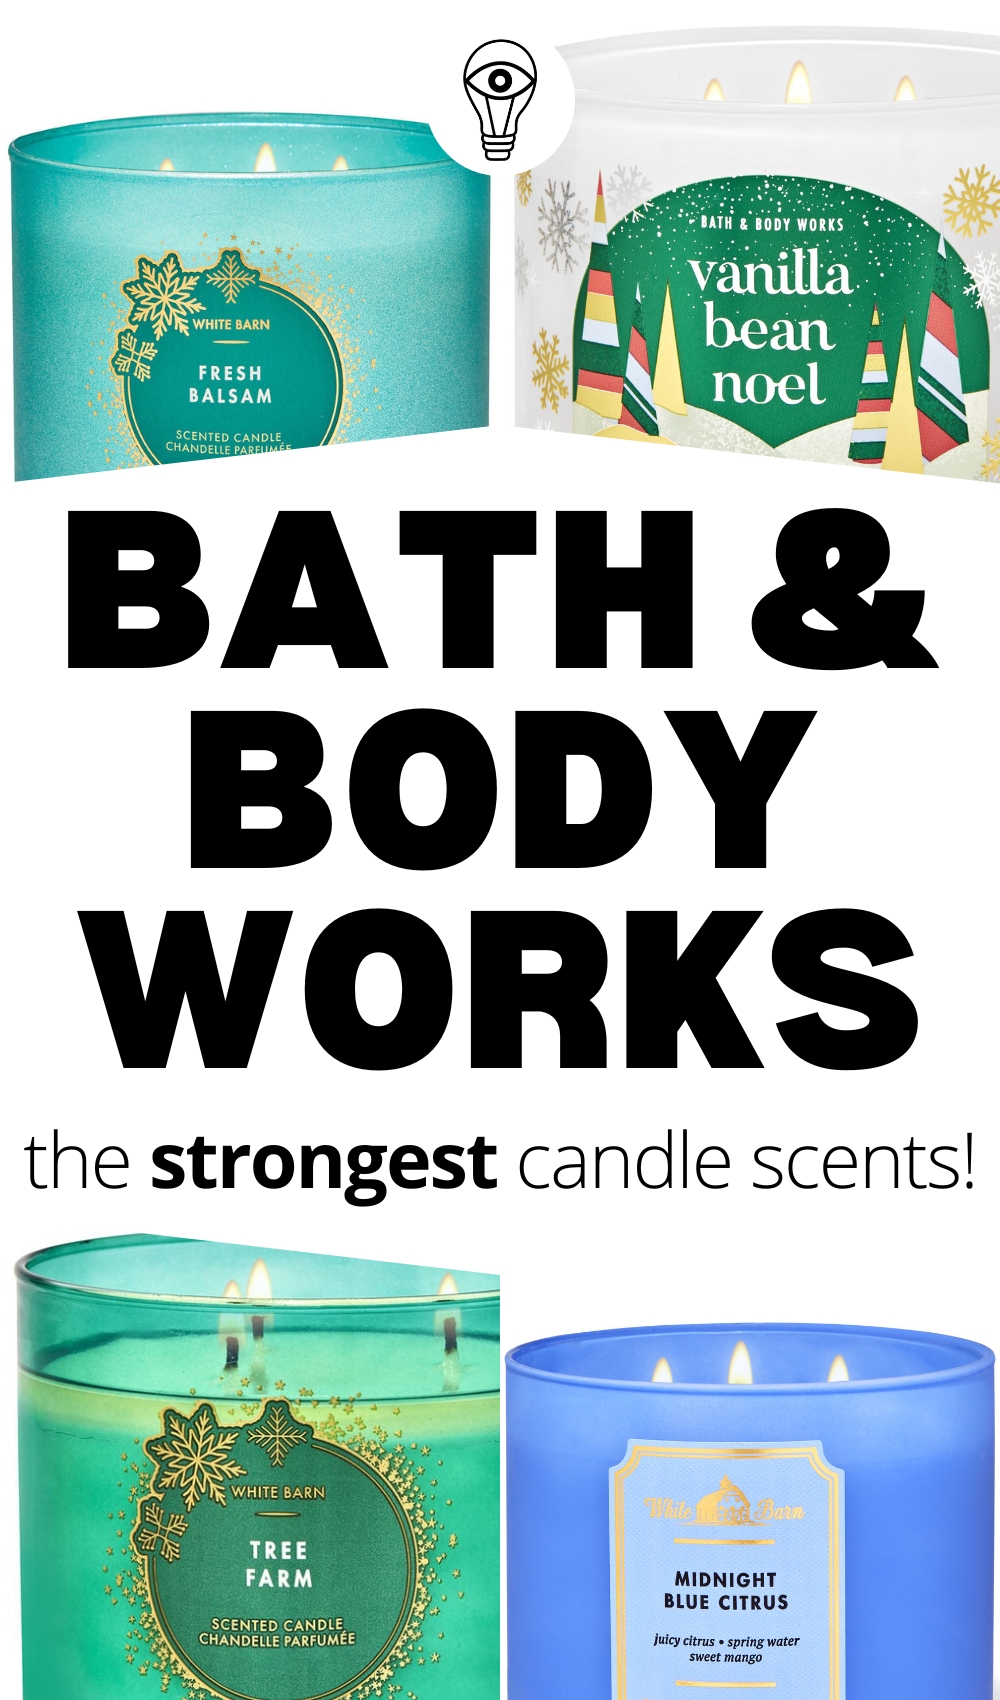 best bath and body works candles - best bath and body works candle scents - strongest bath and body works candles - best bath and body works candle christmas fall - best seller bath and body works candle - most popular candle scents - best bath and body works candles for summer - for spring - winter 